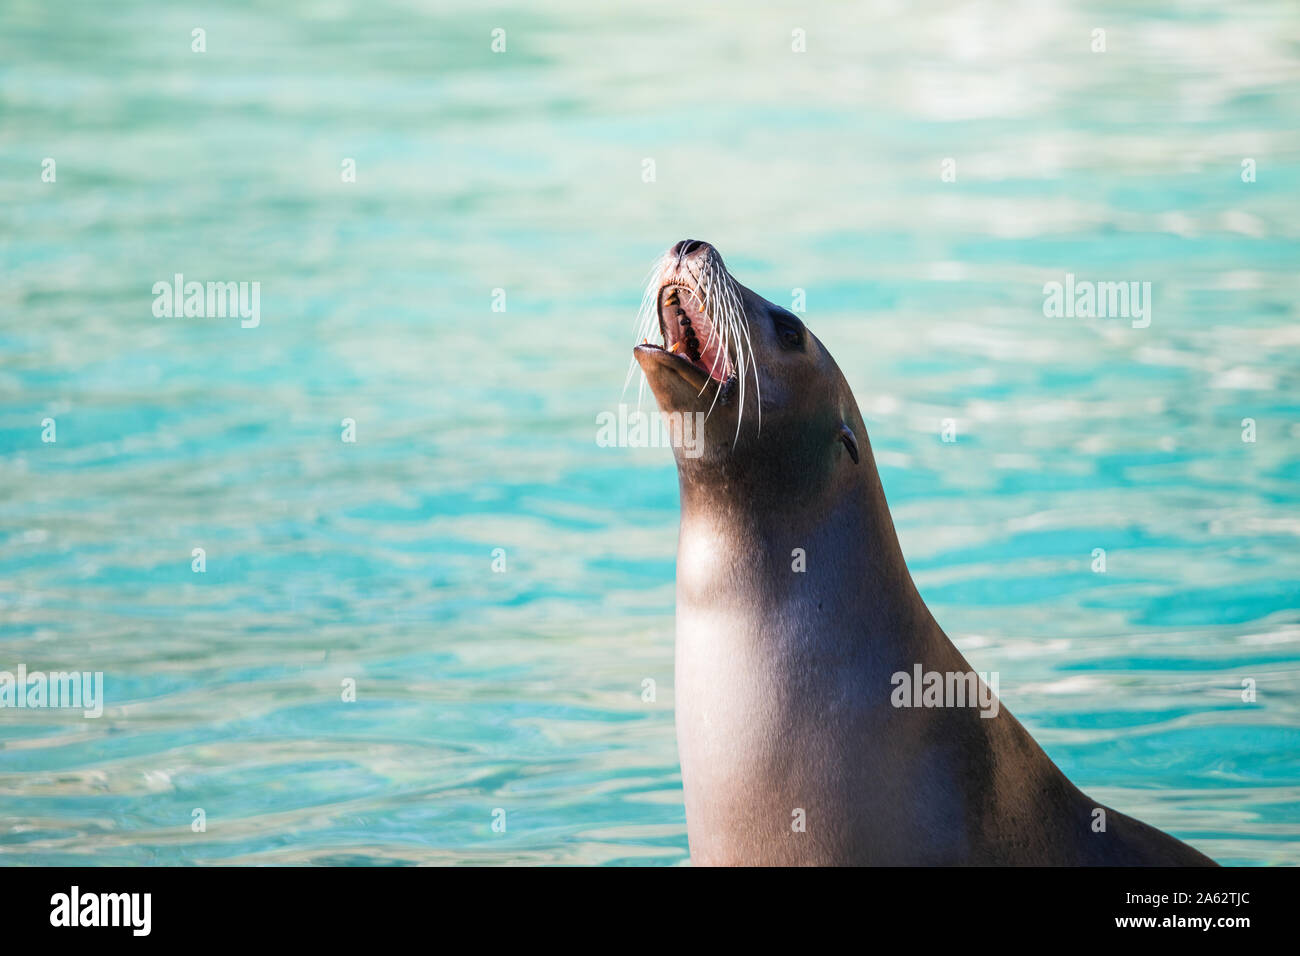 A Californian sea lion barks in front of the clear blue water. Stock Photo